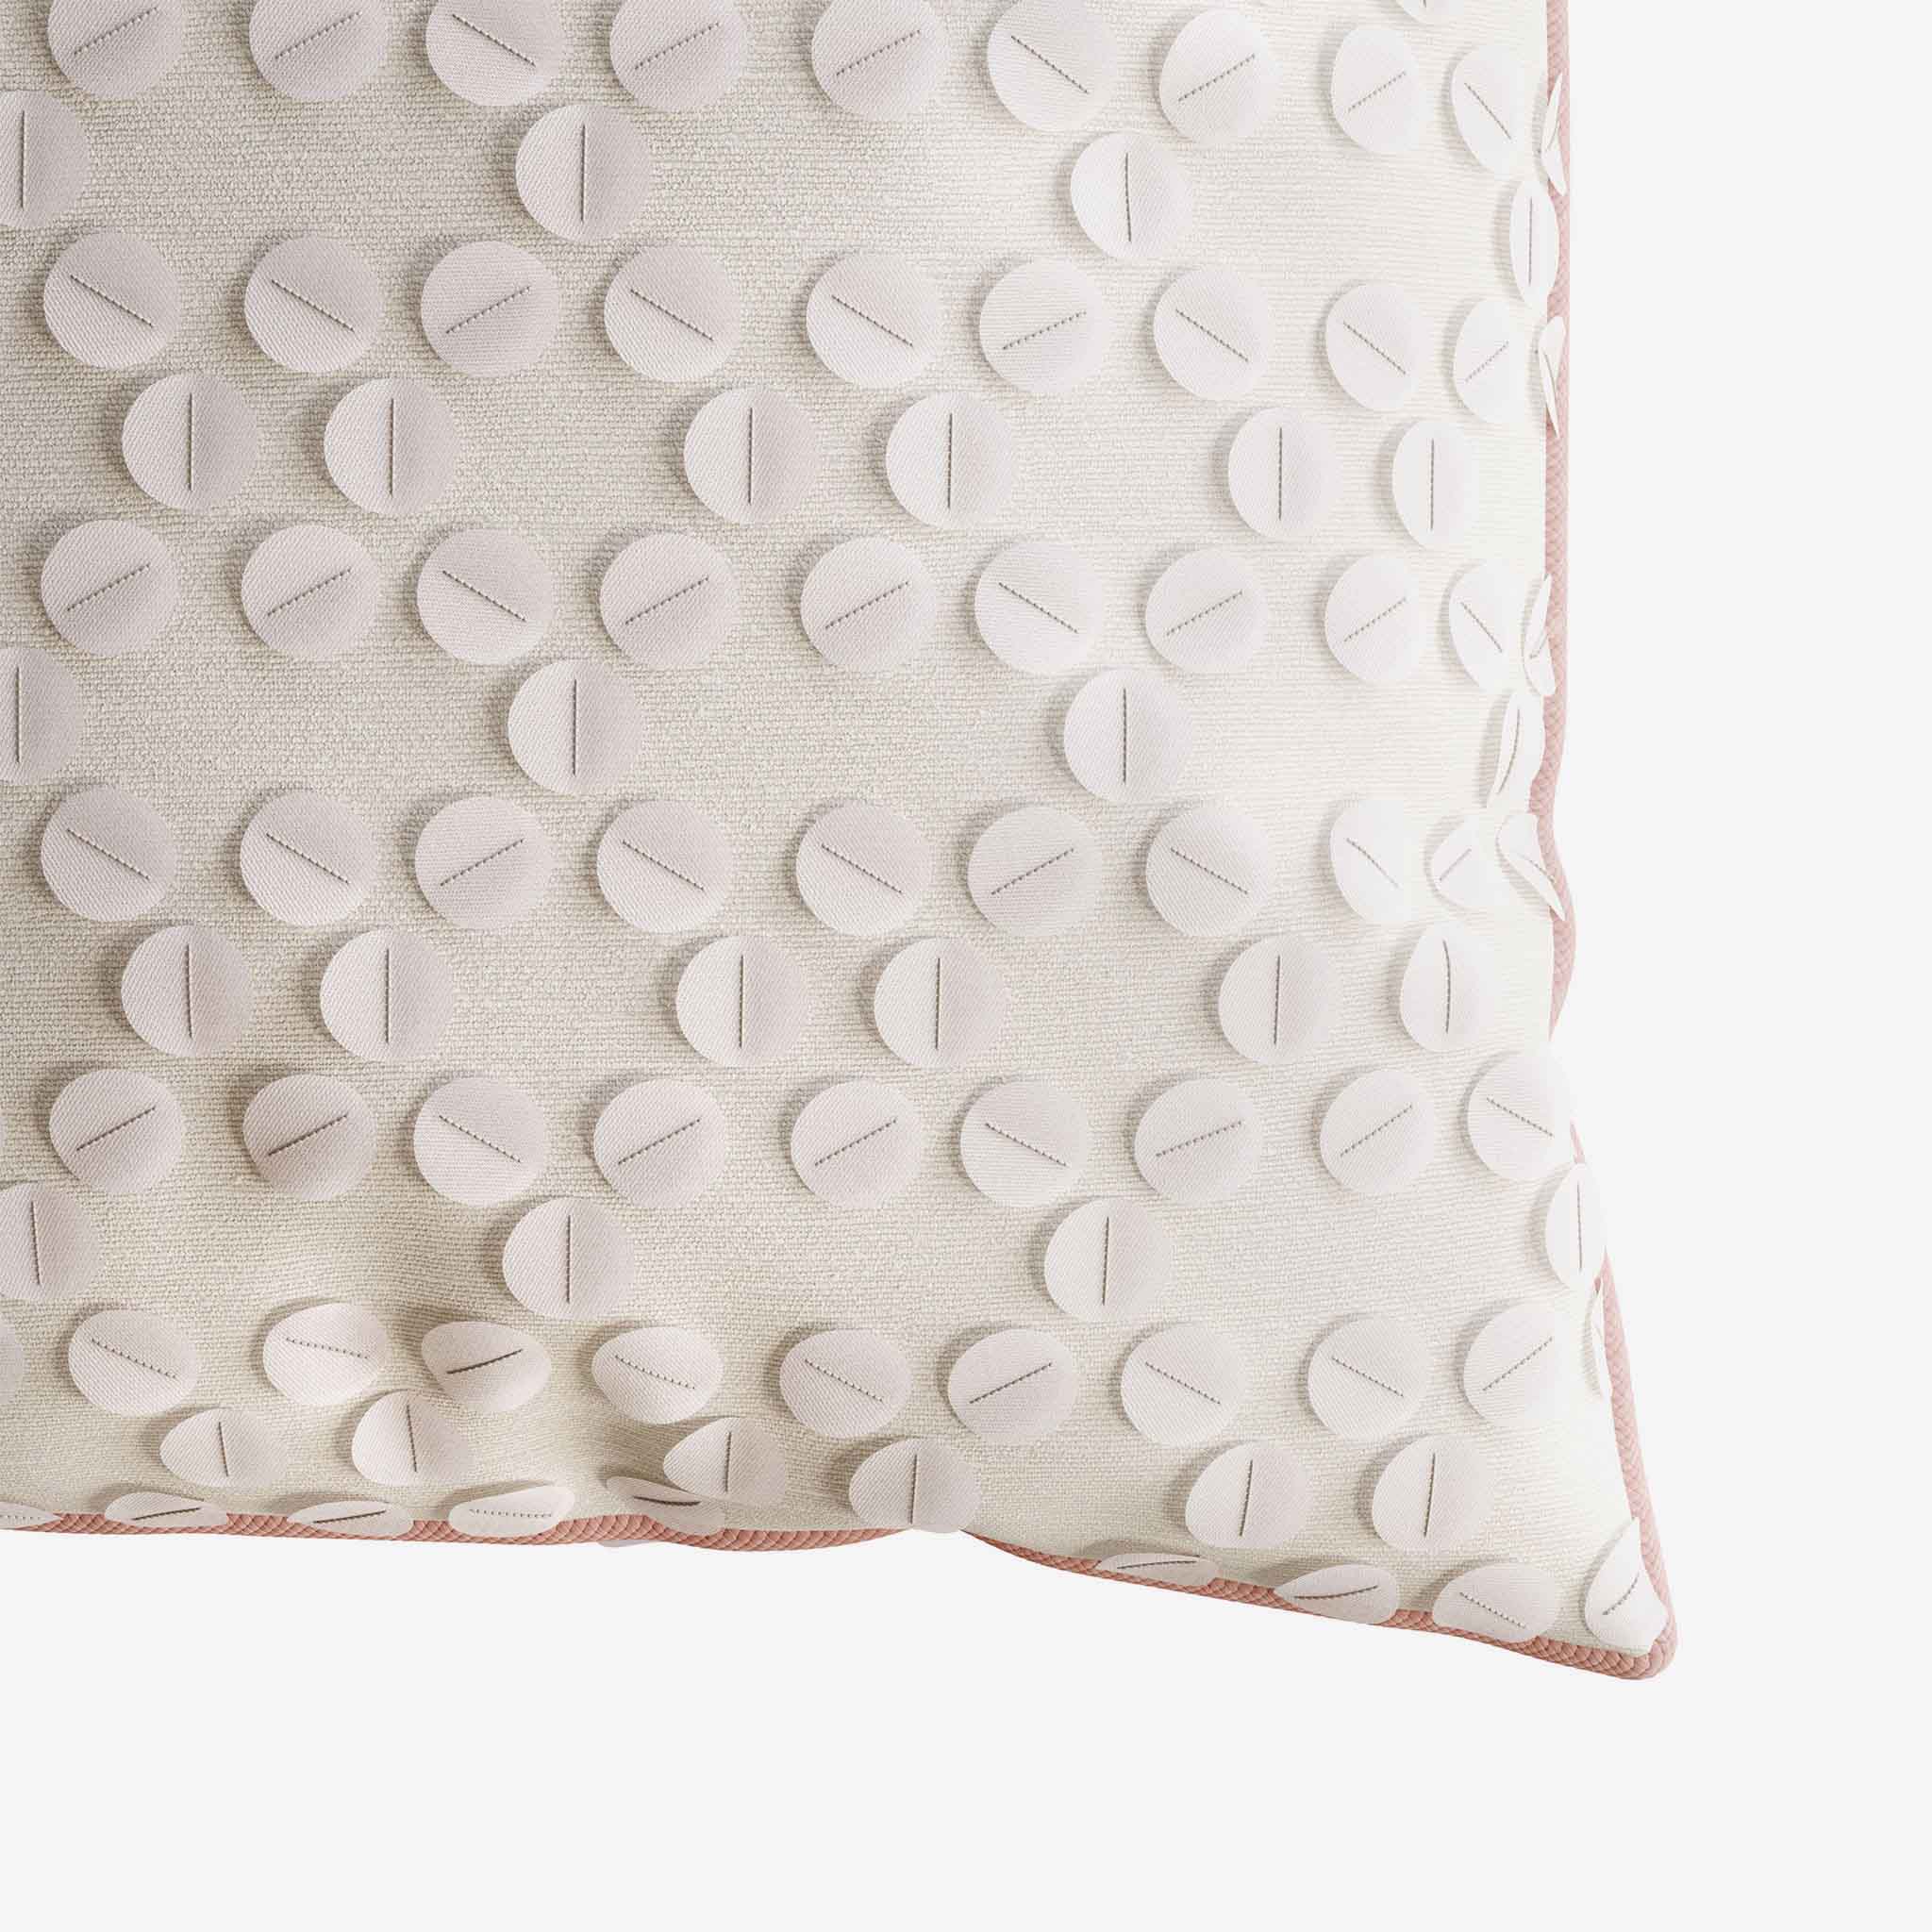 Luxury Cushion, Off-White Fabric, Geometric Pattern, Pink Lining, Bedroom, Living Room